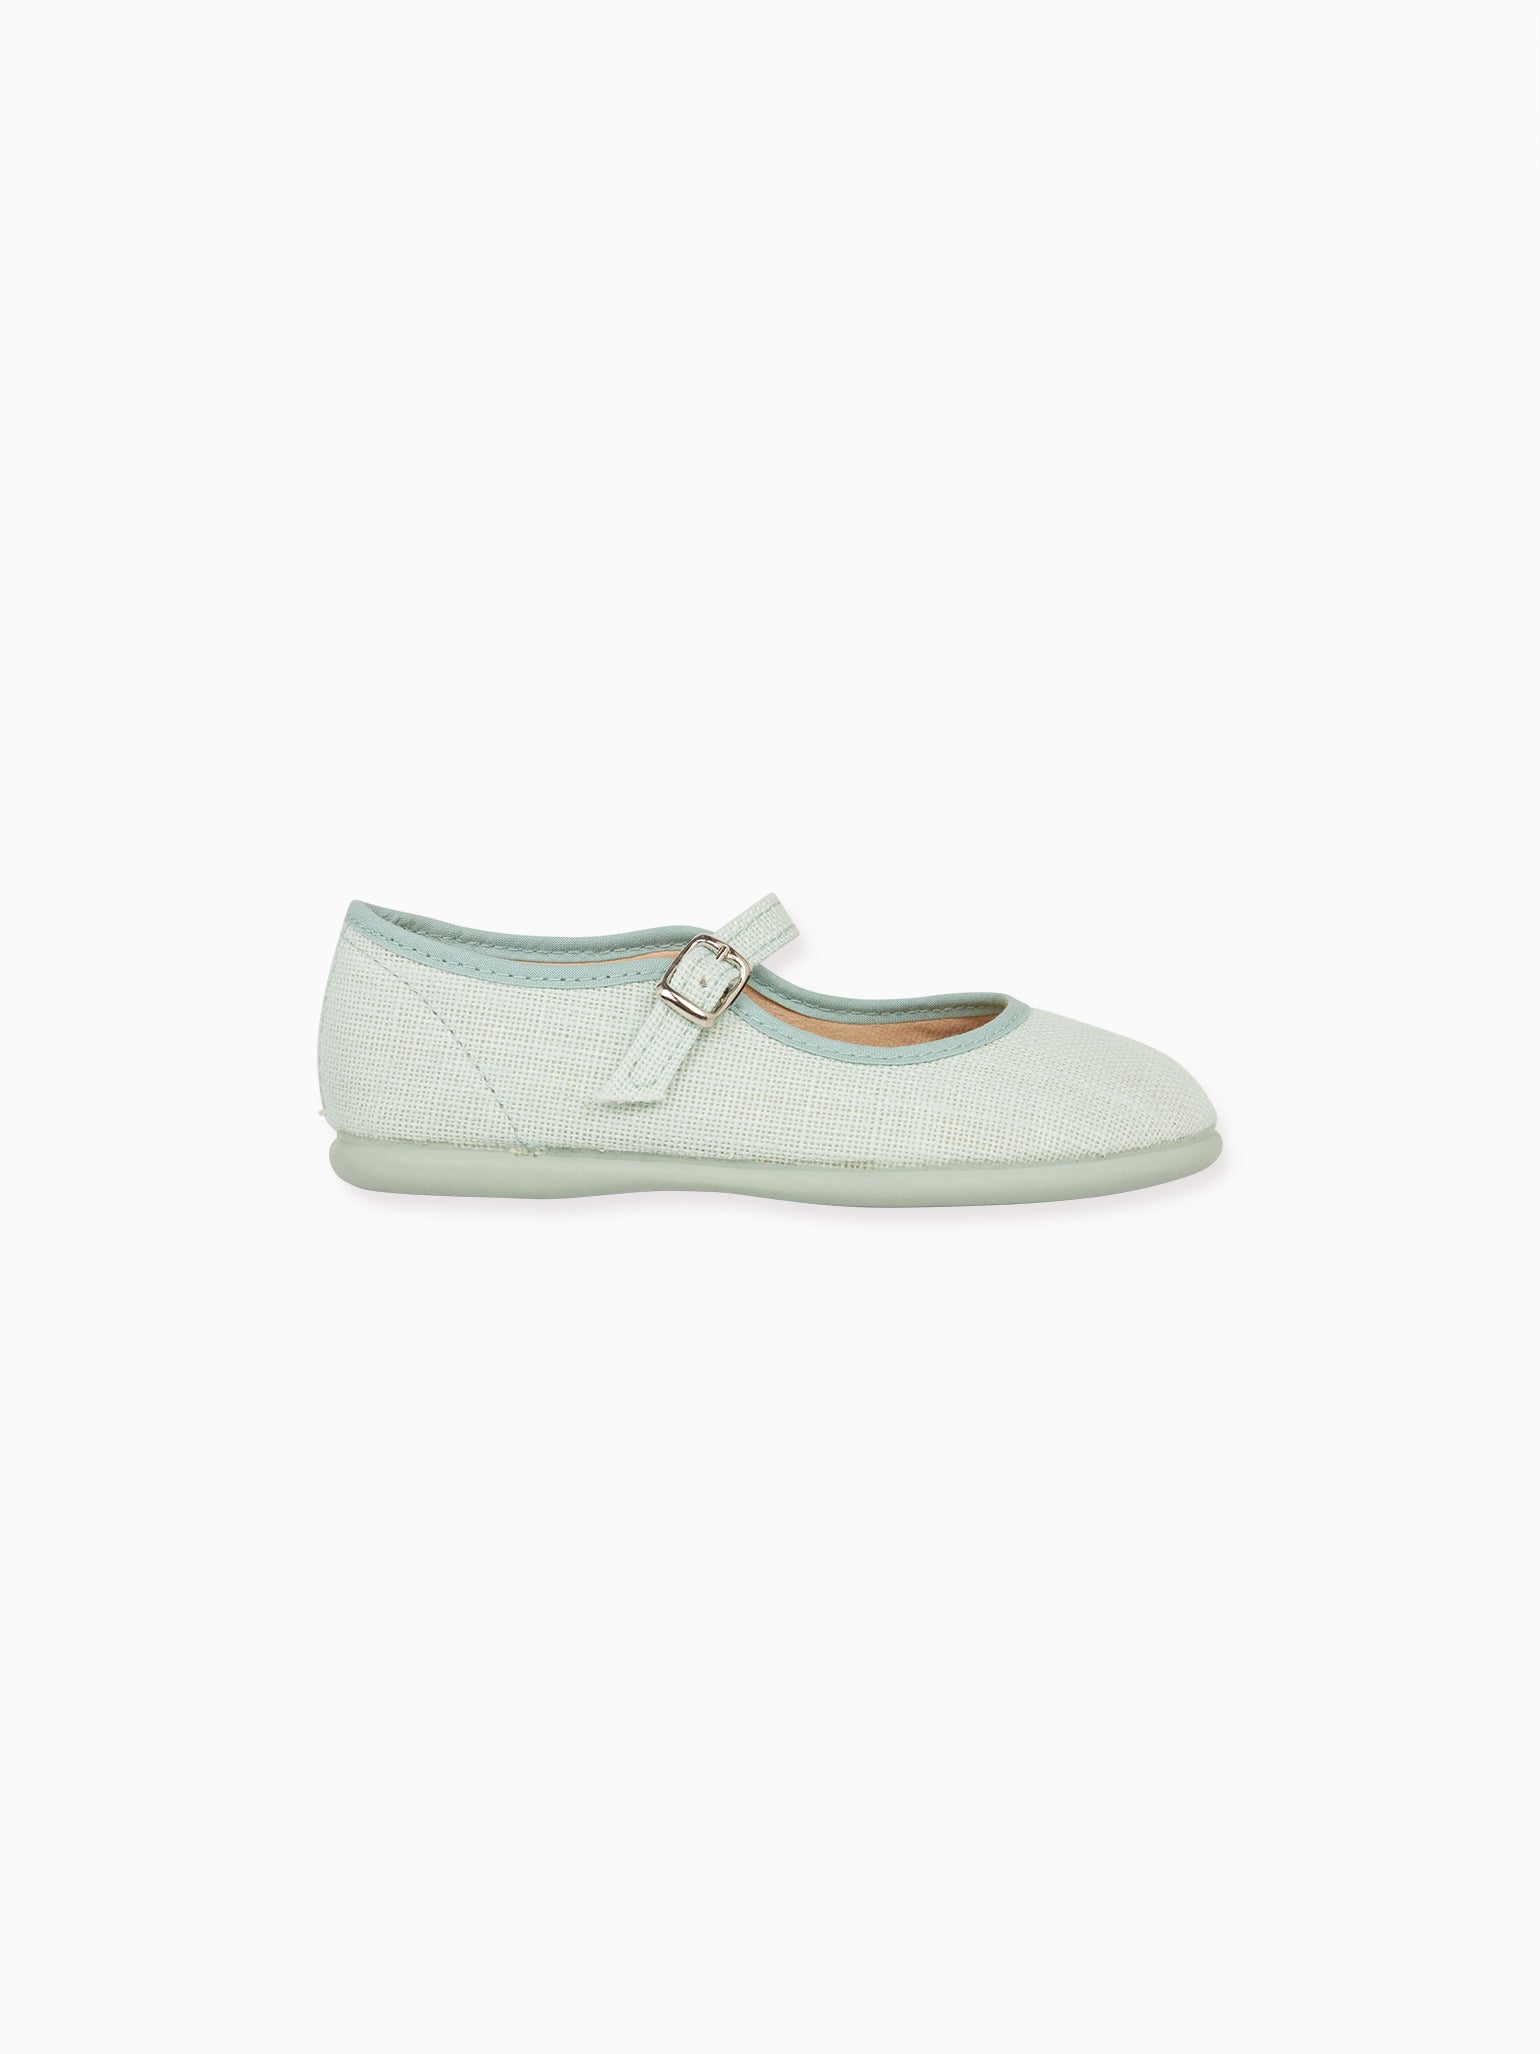 Mint Canvas Girl Mary Jane Shoes